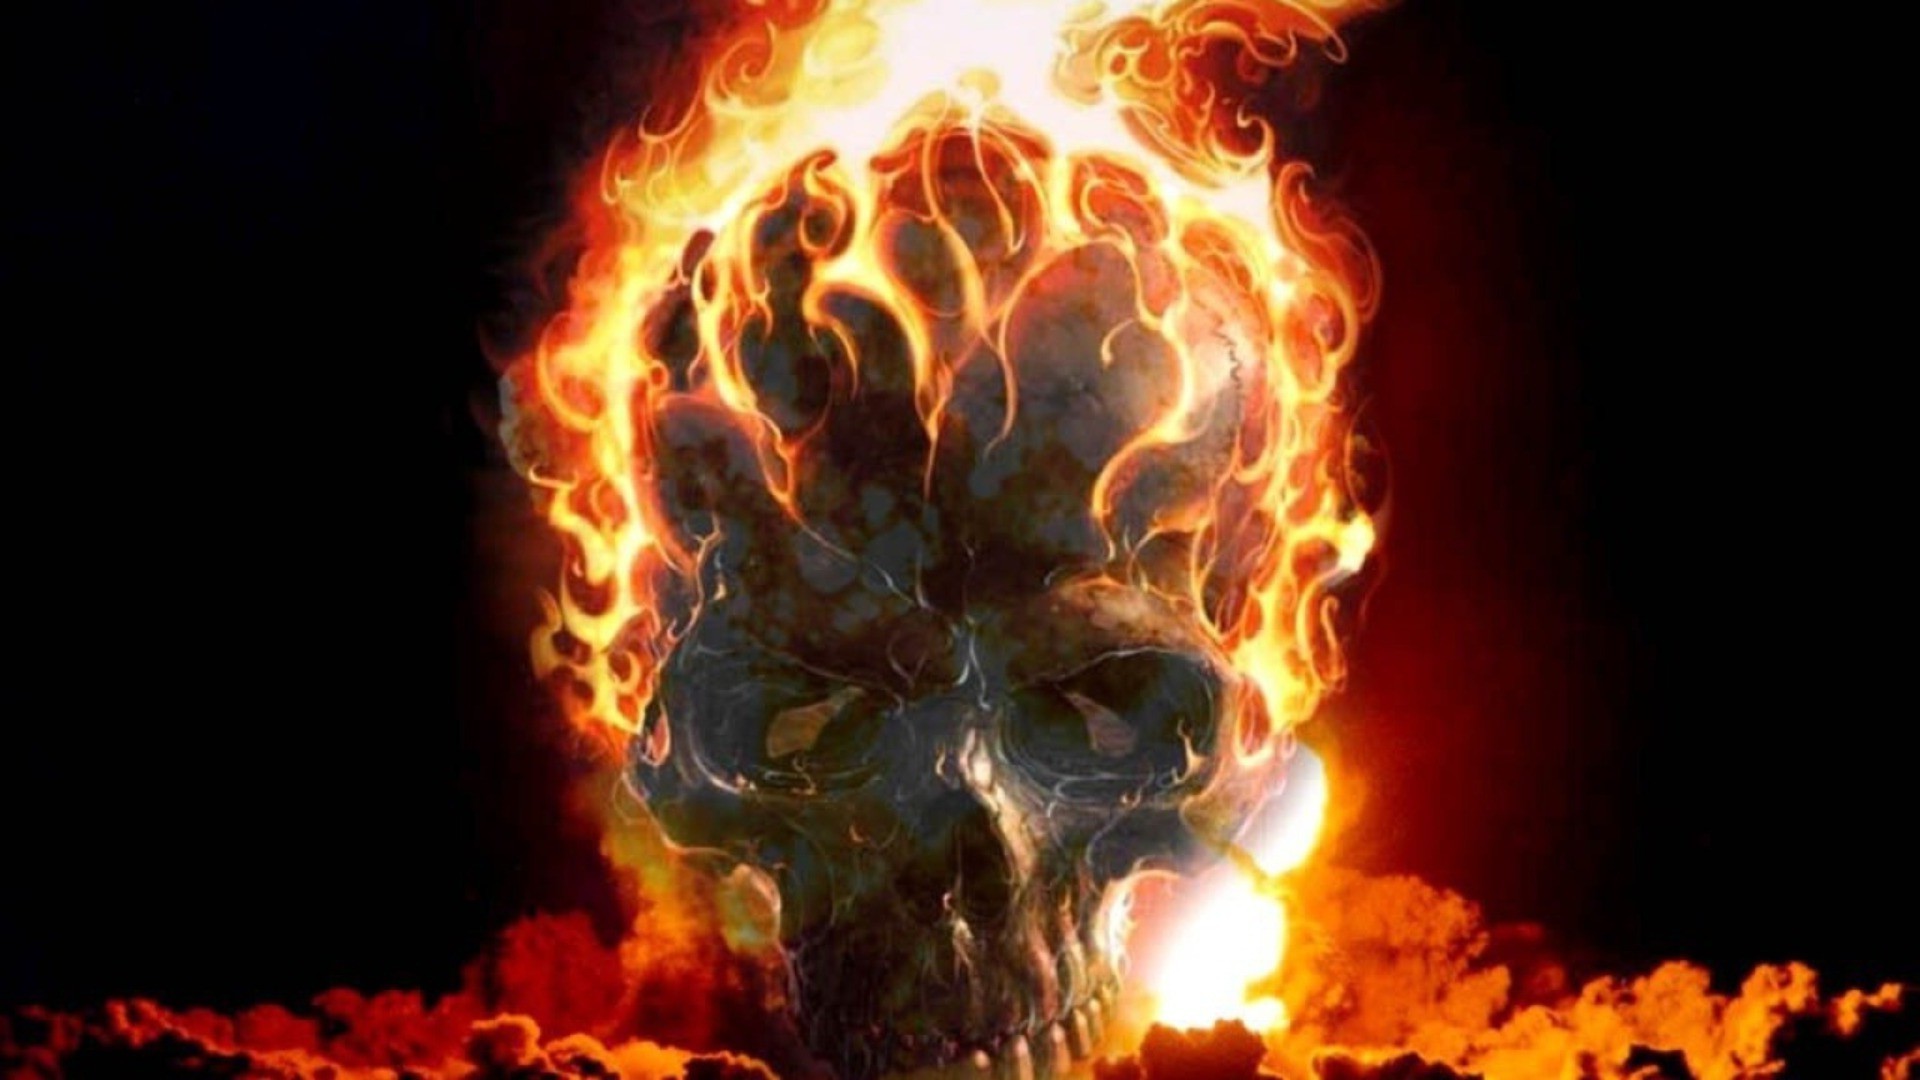 Skull on fire - Phone wallpapers